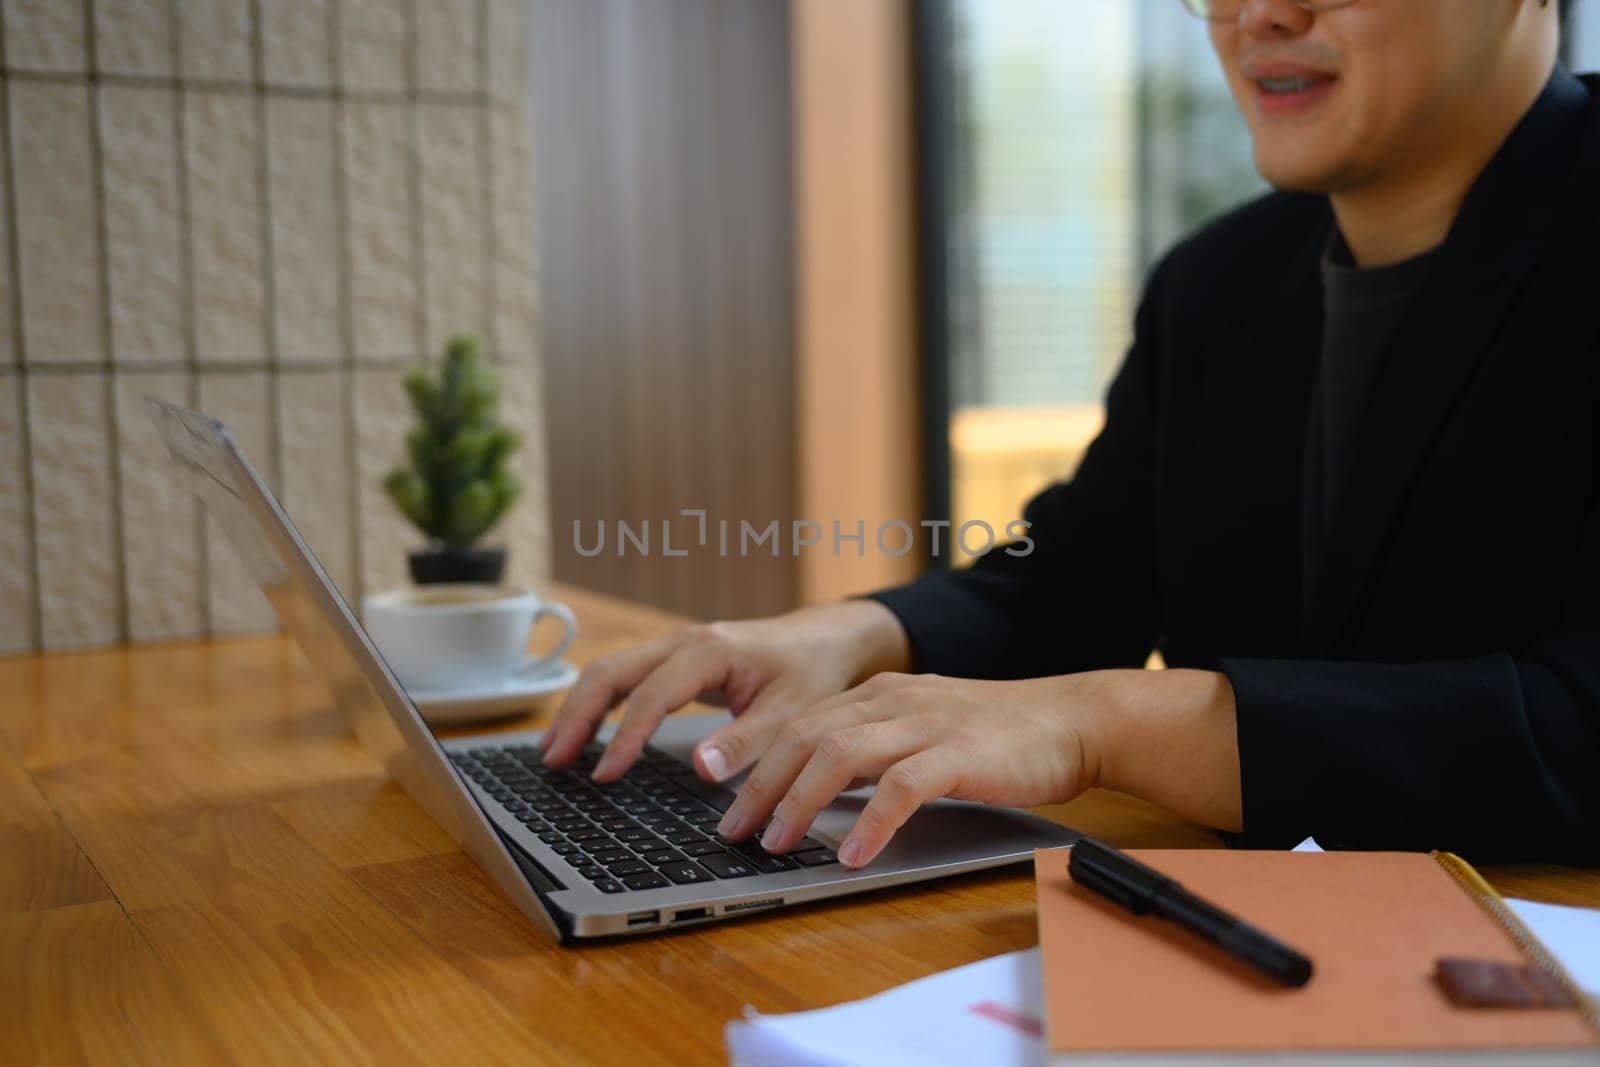 Smiling male worker hands typing on laptop keyboard answering email or searching information.